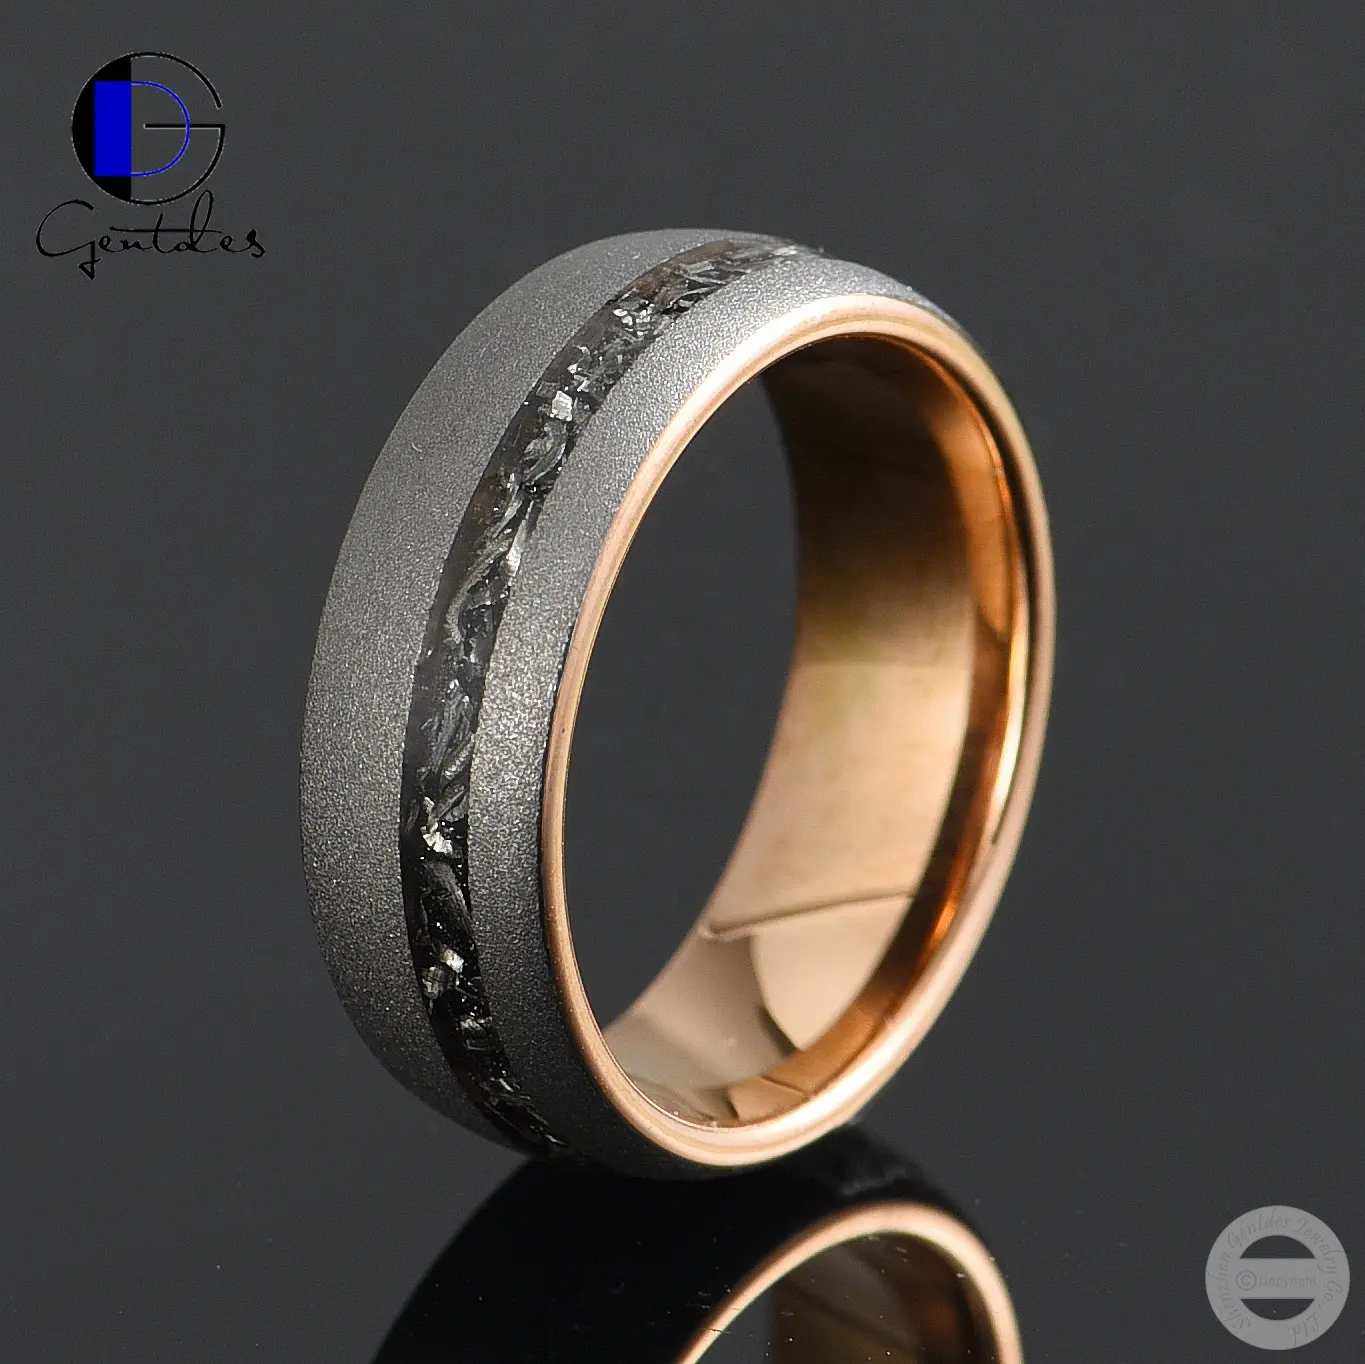 Gentdes Jewelry Fashion Wedding Ring Custom Shiny Sandblast Silver Surface 8MM Dome Delicate Crushed Meteorite Tungsten Ring